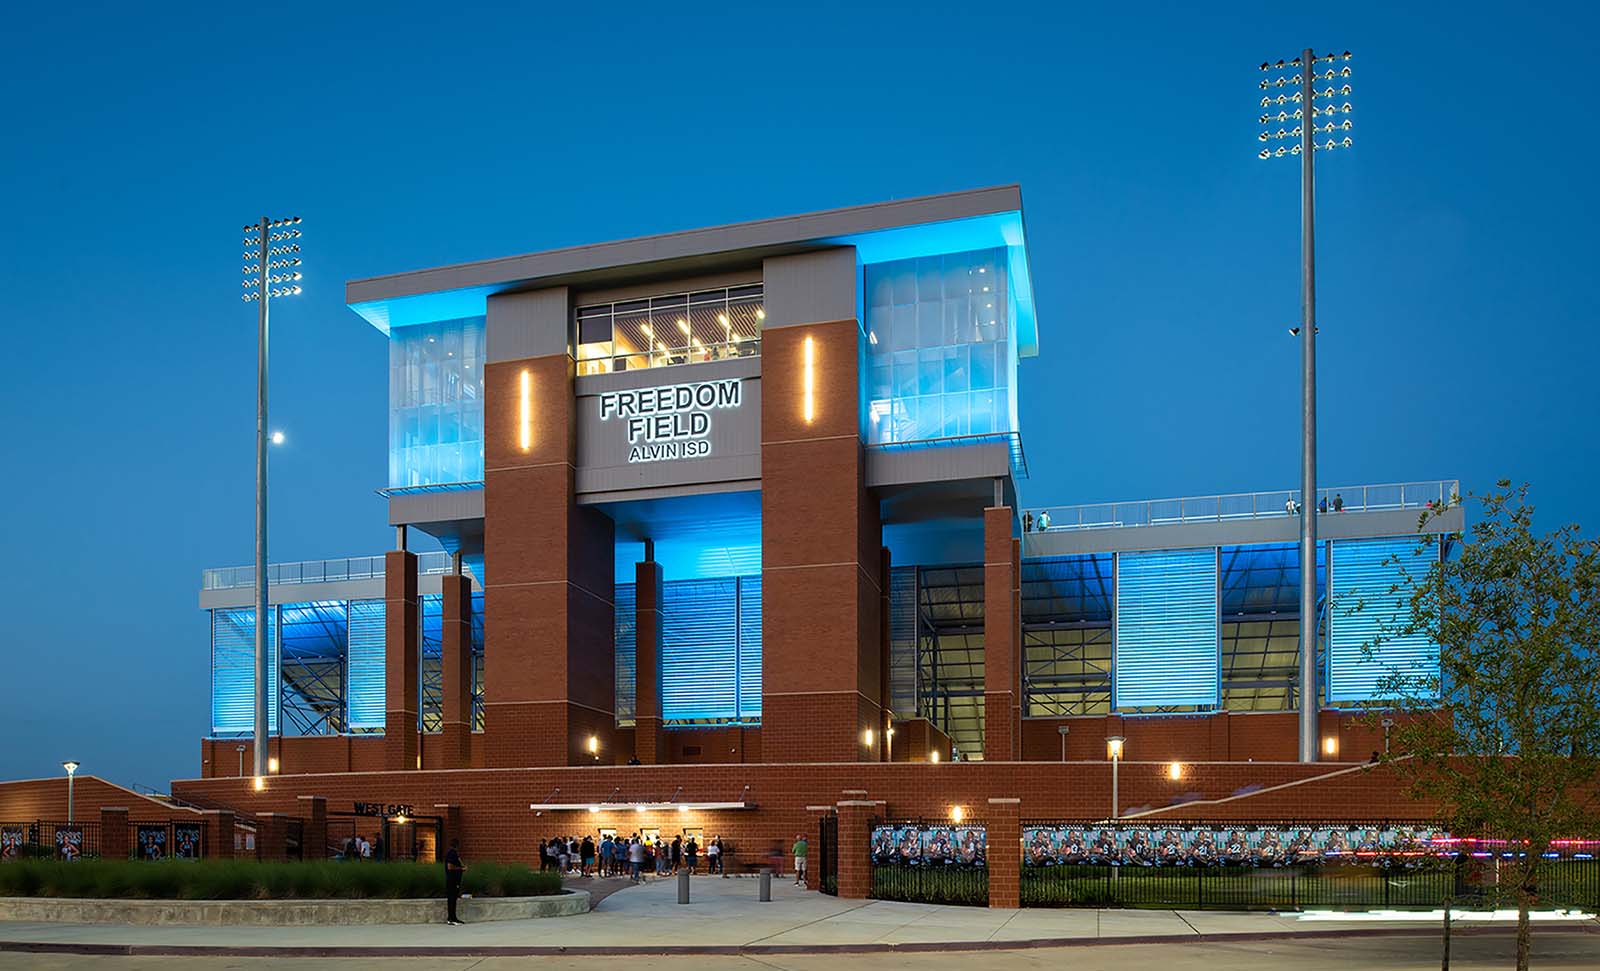 Emerging Trends in Sports Facility Design